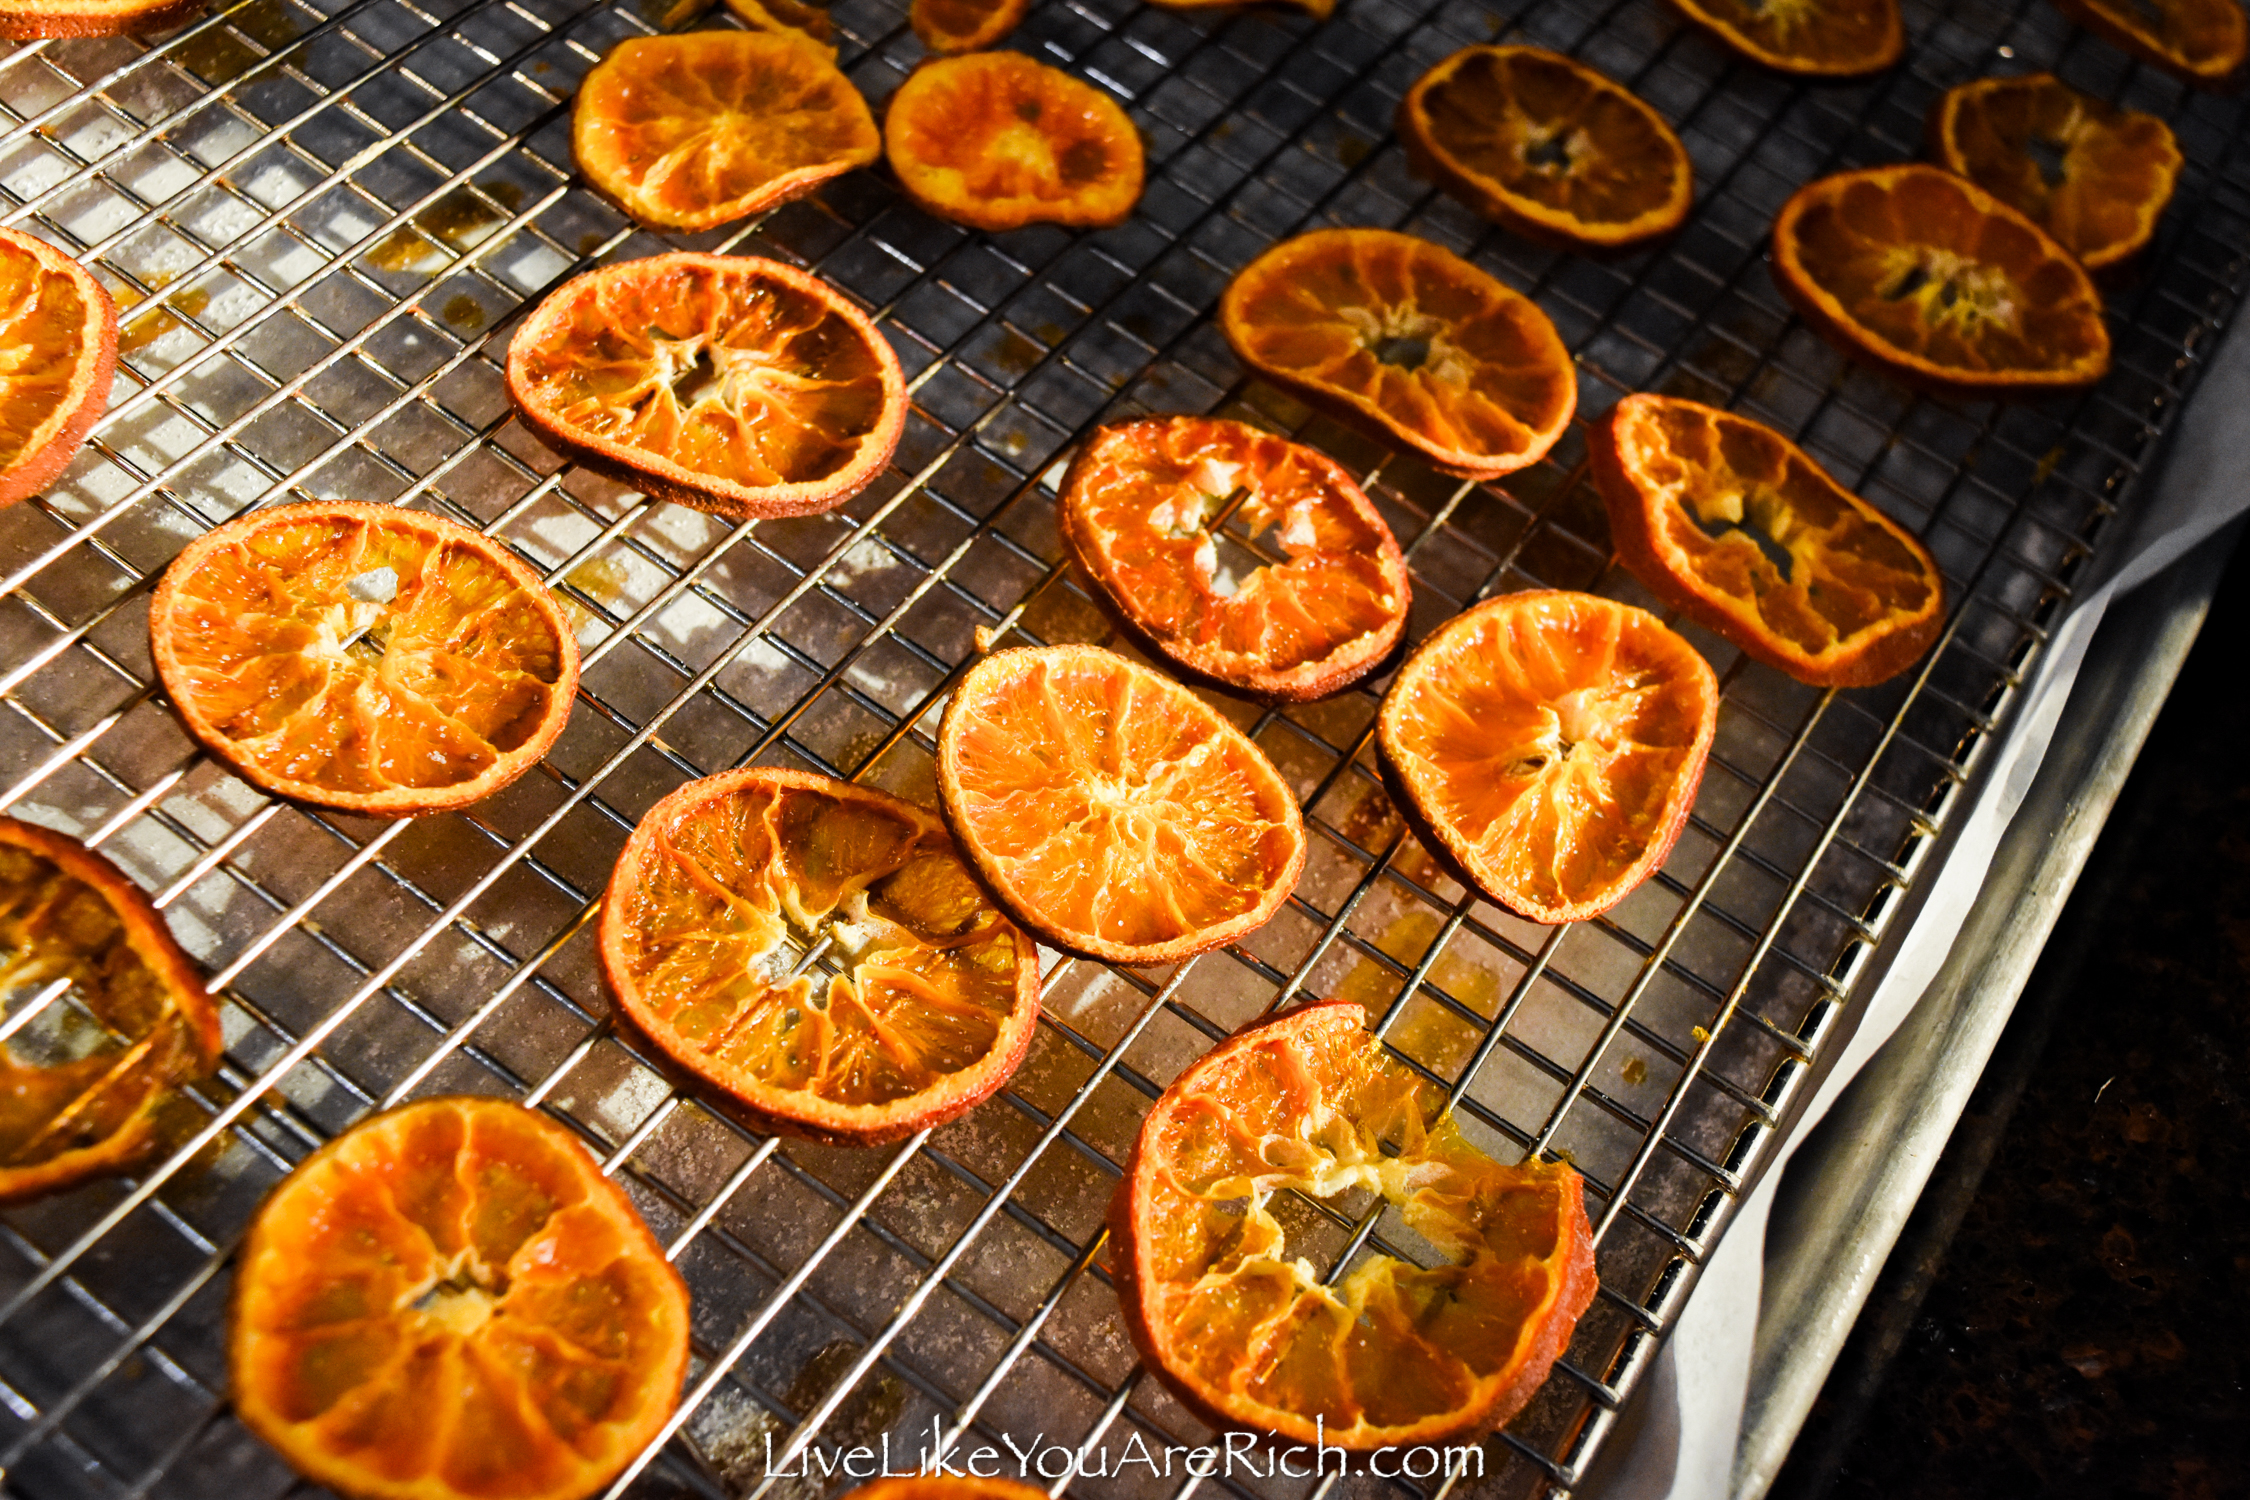 How to Dry Clementine Slices